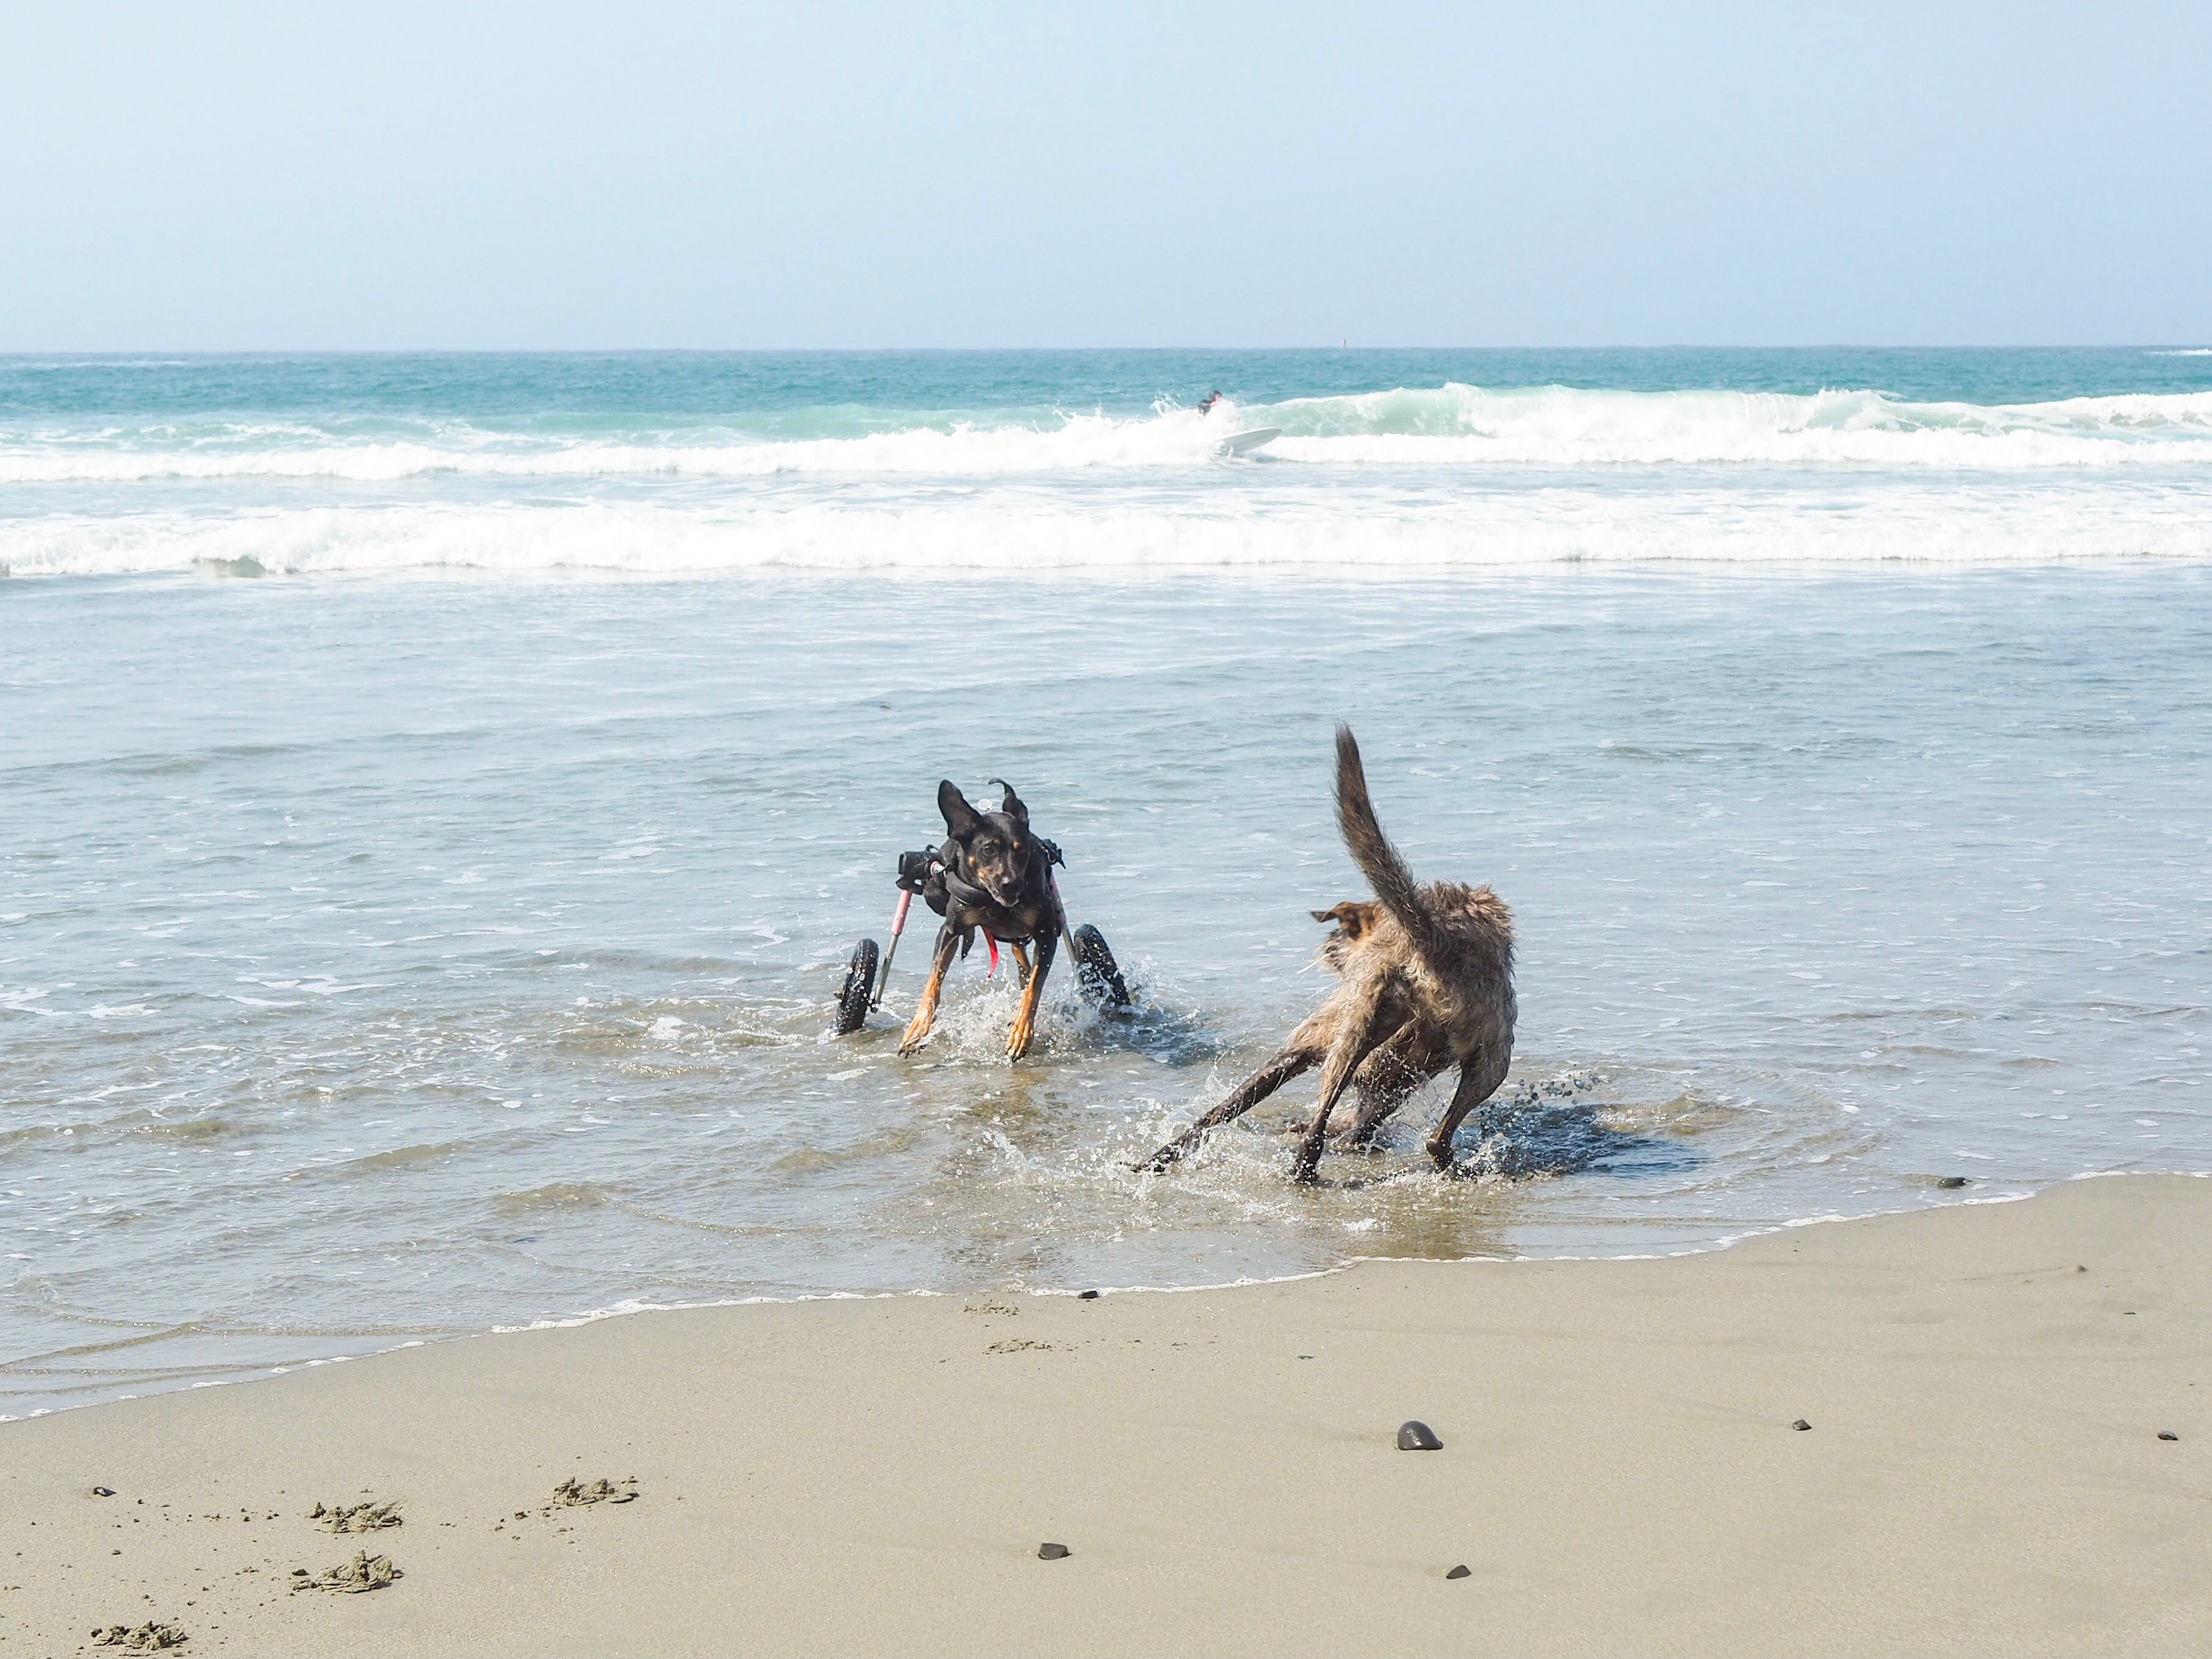 Two dogs run and play together in the sand and ocean.